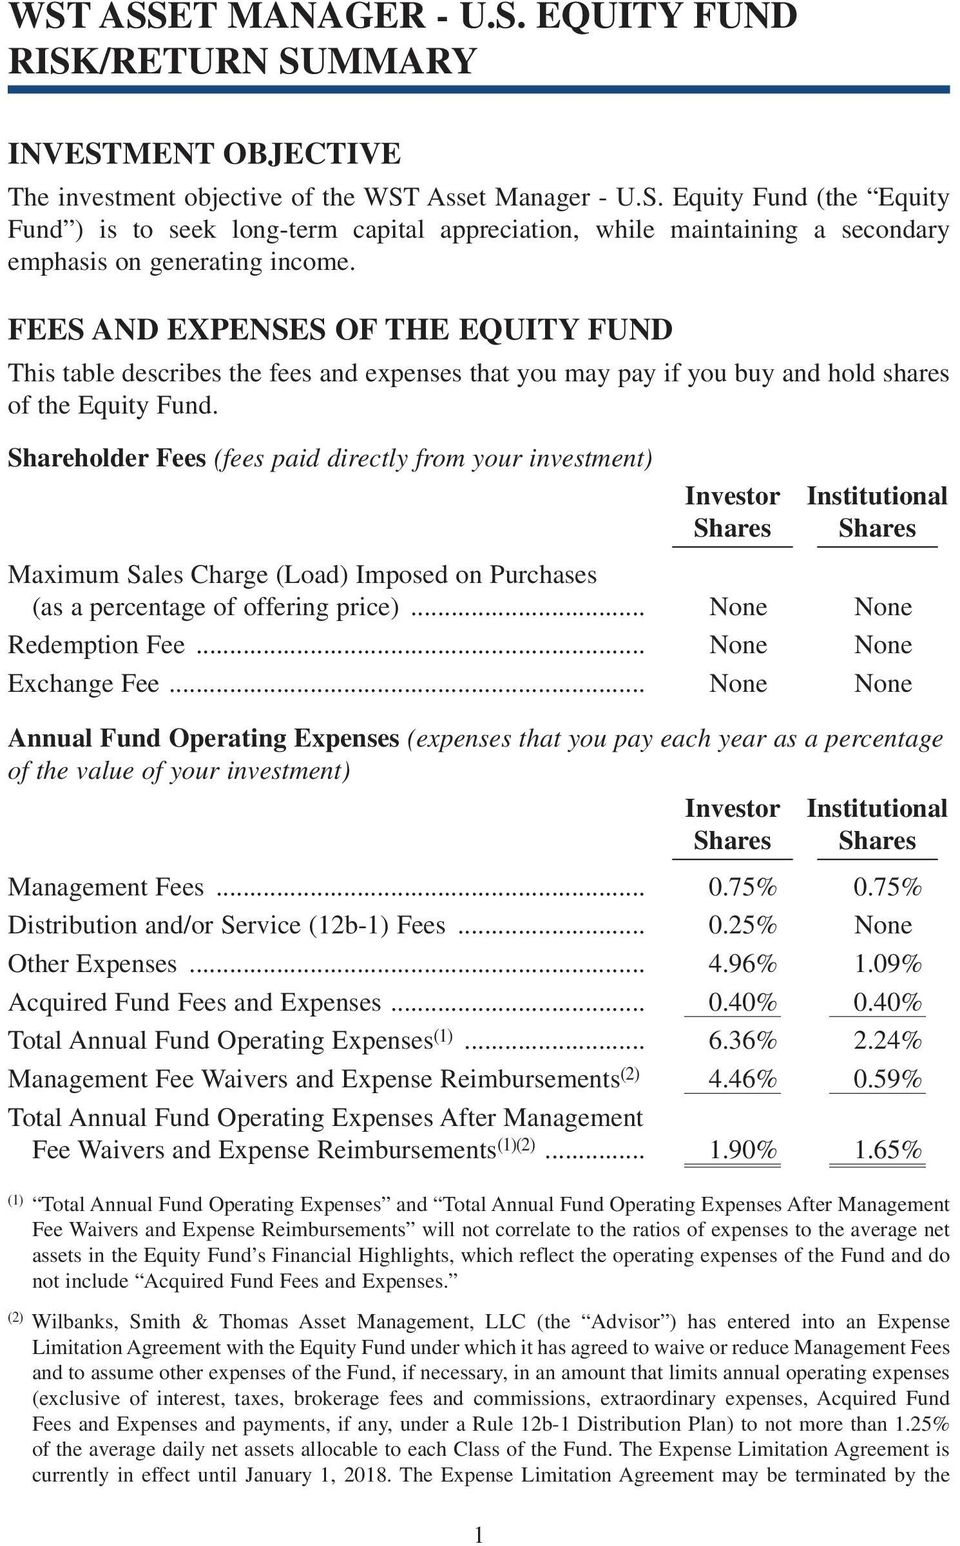 Shareholder Fees (fees paid directly from your investment) Investor Shares Institutional Shares Maximum Sales Charge (Load) Imposed on Purchases (as a percentage of offering price).